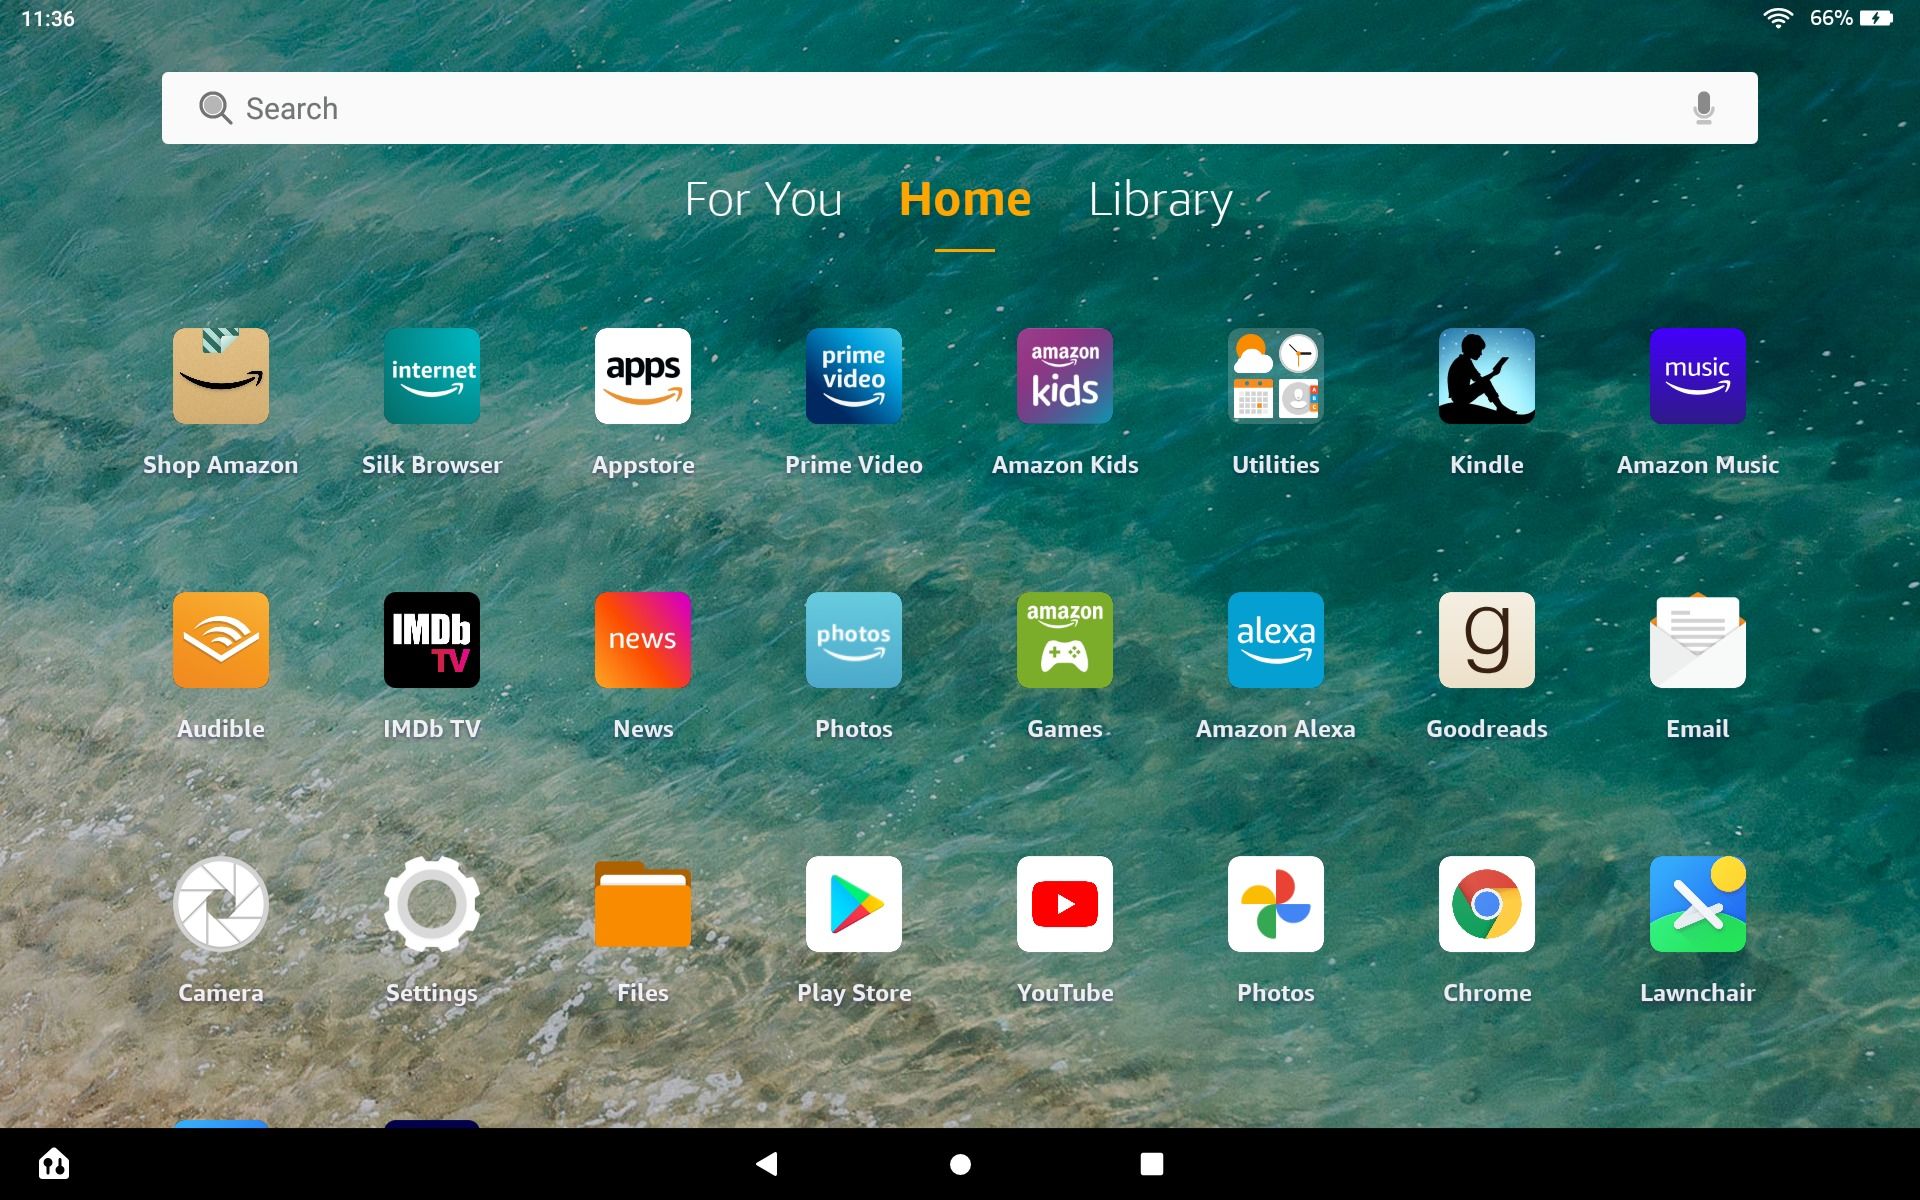 The Home Screen as displayed on an Amazon Fire Tablet